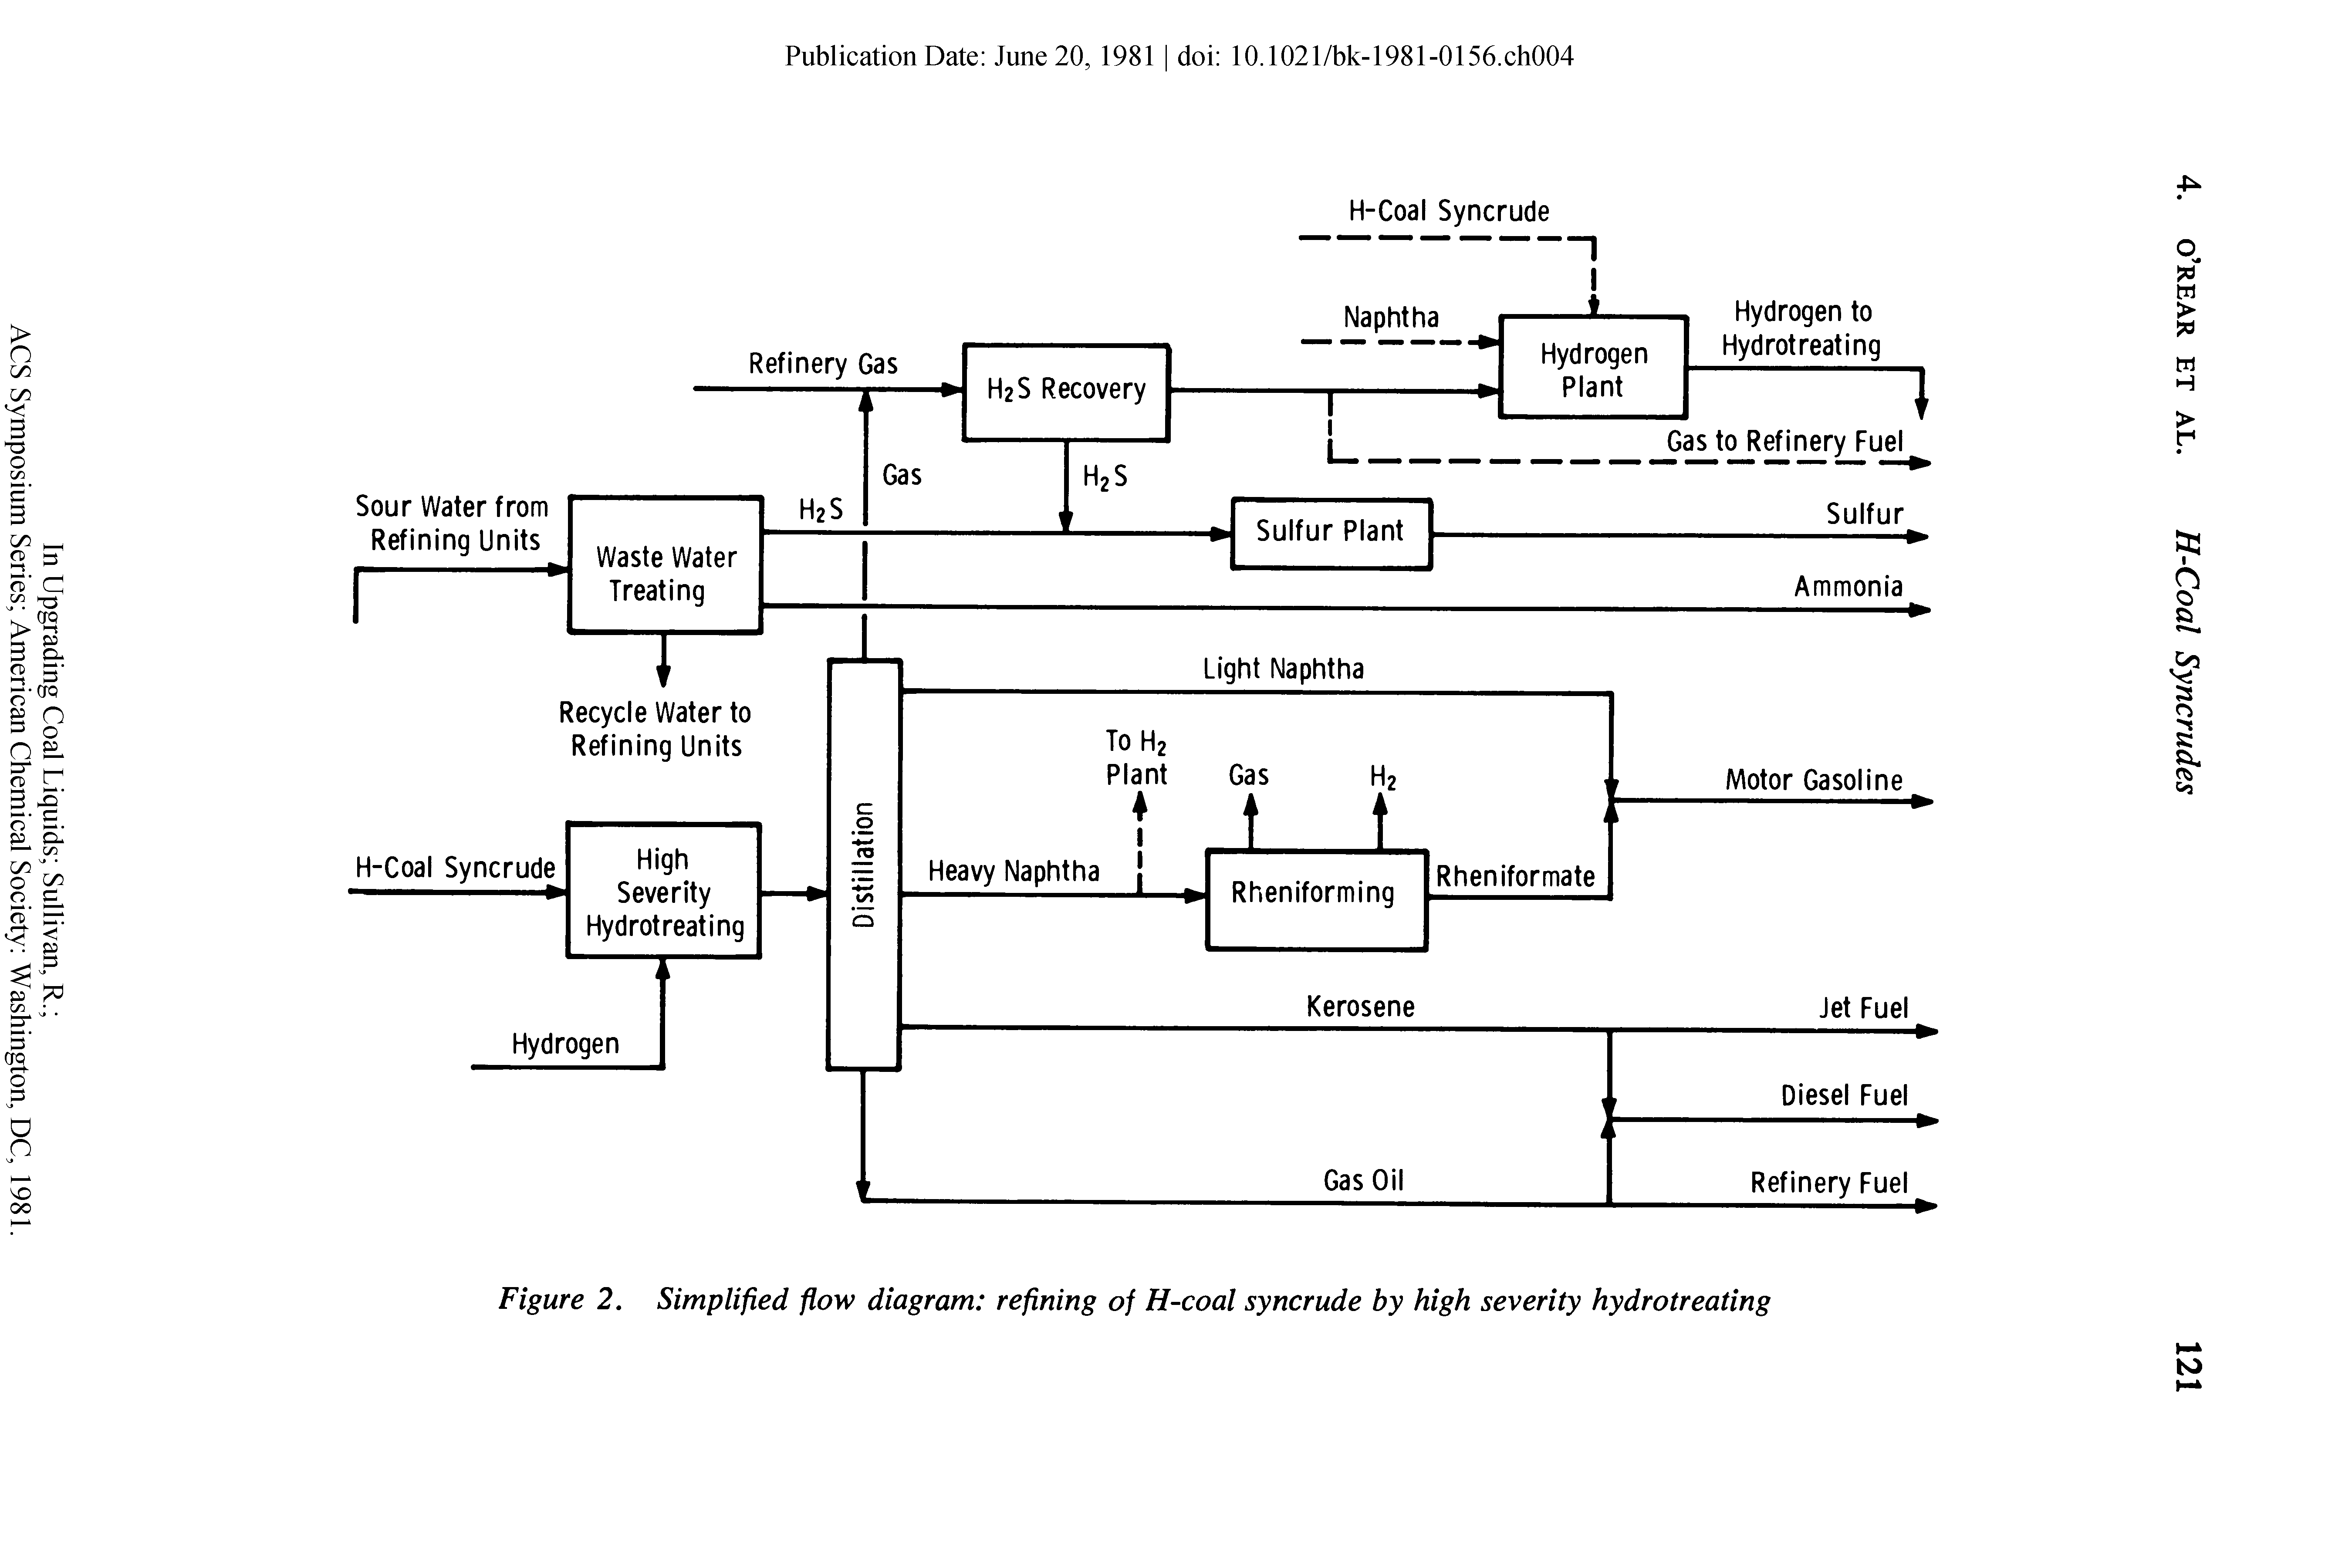 Figure 2. Simplified flow diagram refining of H-coal syncrude by high severity hydrotreating...